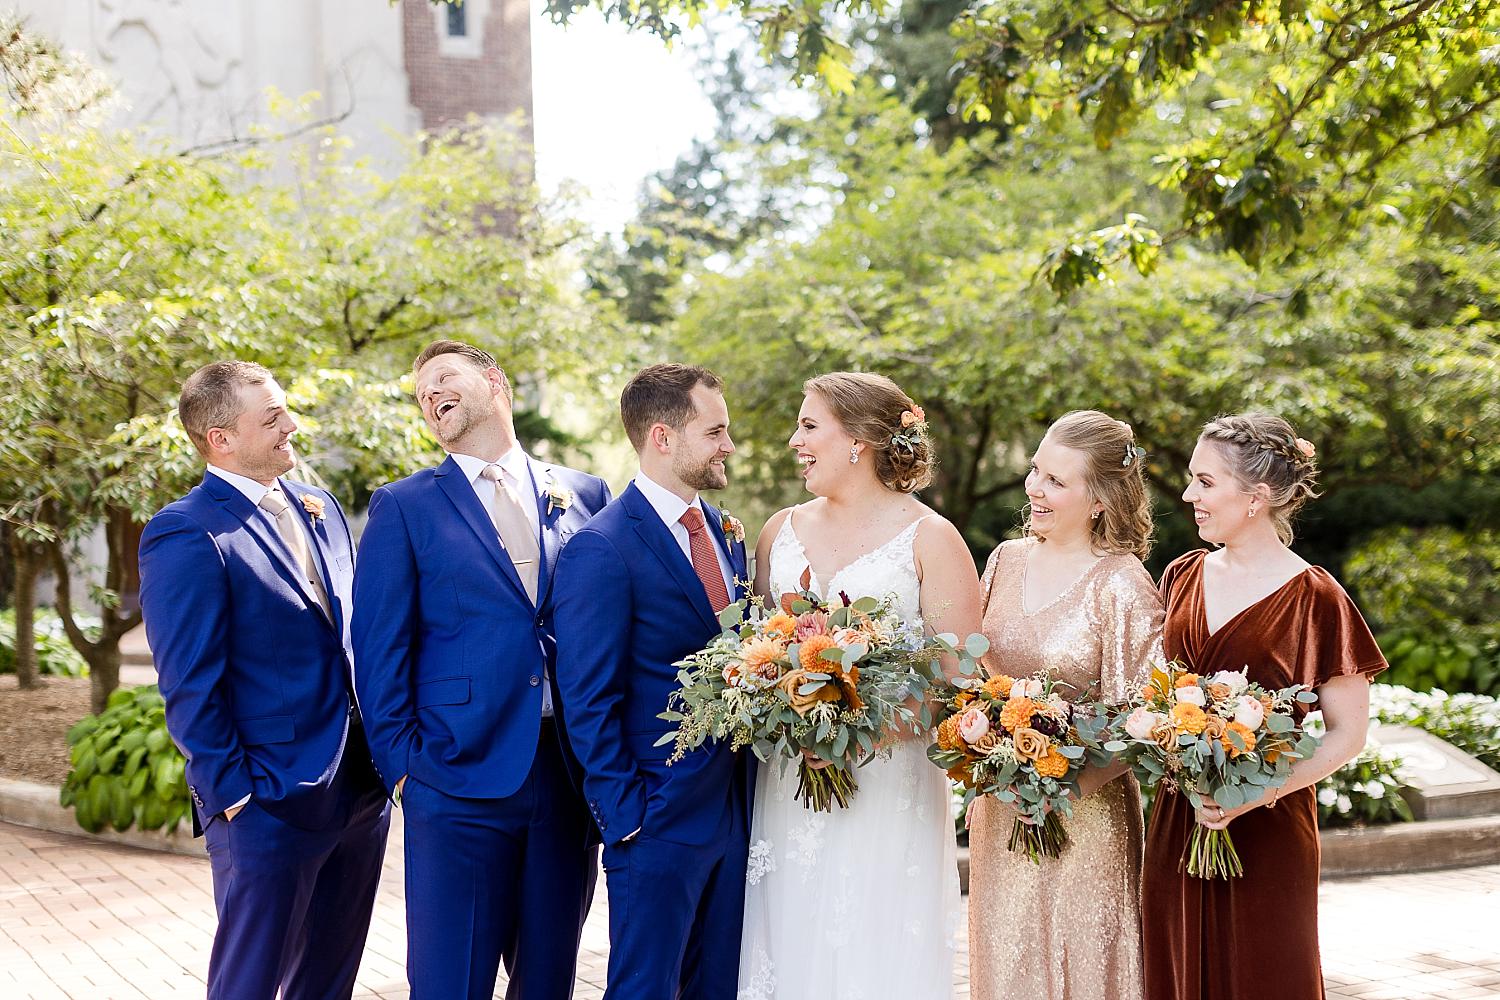 Wedding photographs at MSU's Beaumont Tower